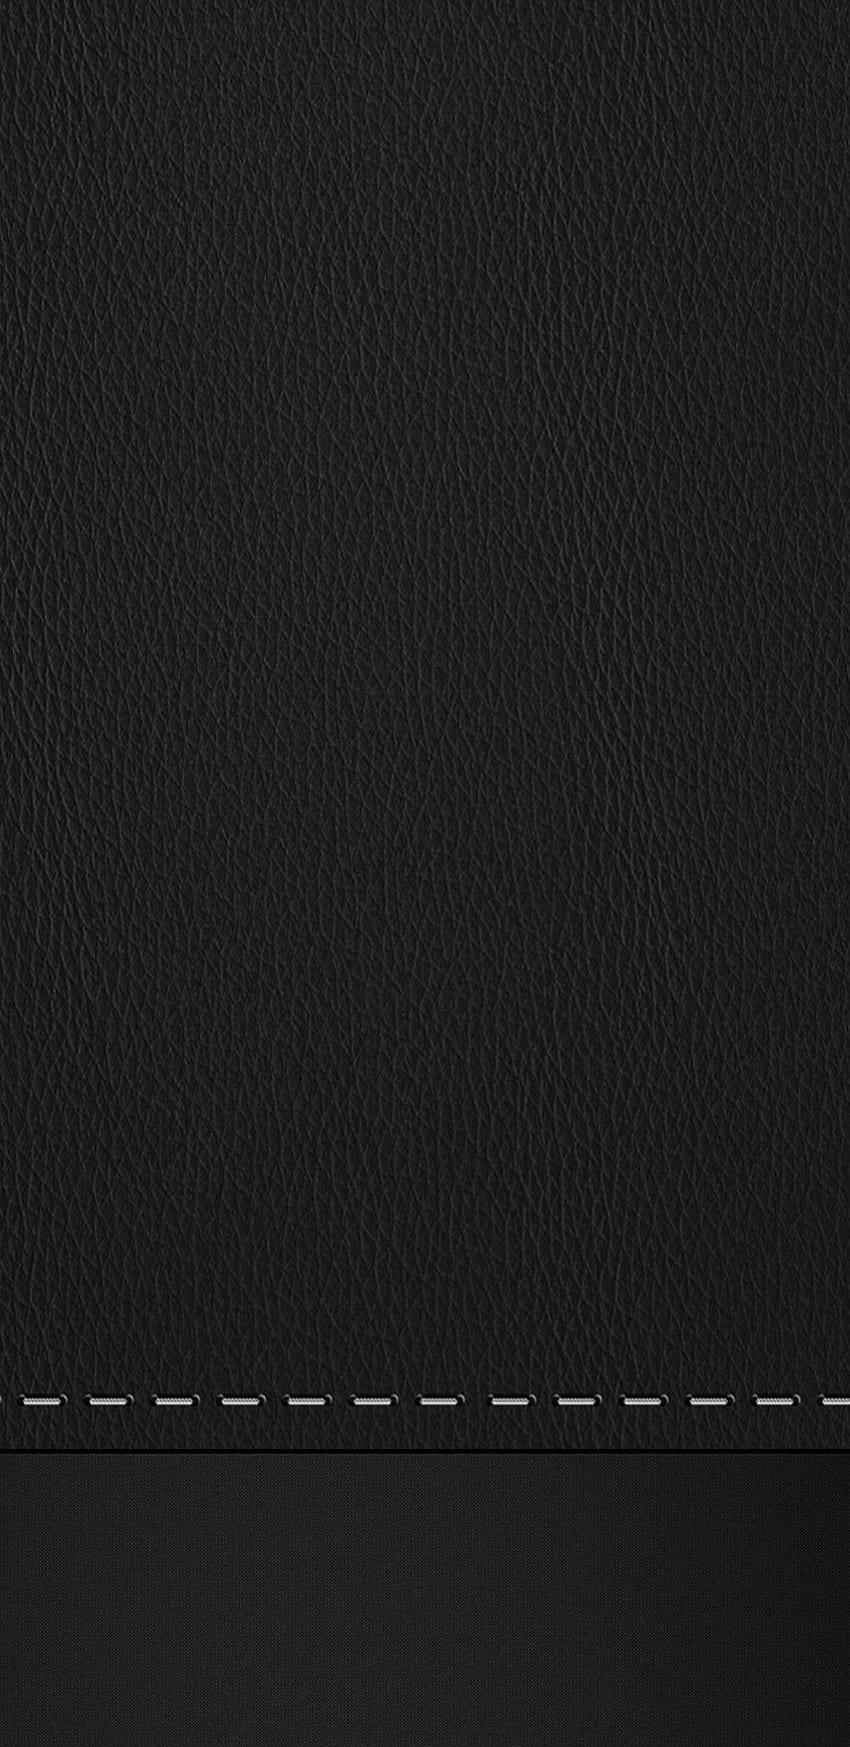 Stitched Leather. 3D iphone, Samsung , Glam, Black Leather HD phone wallpaper